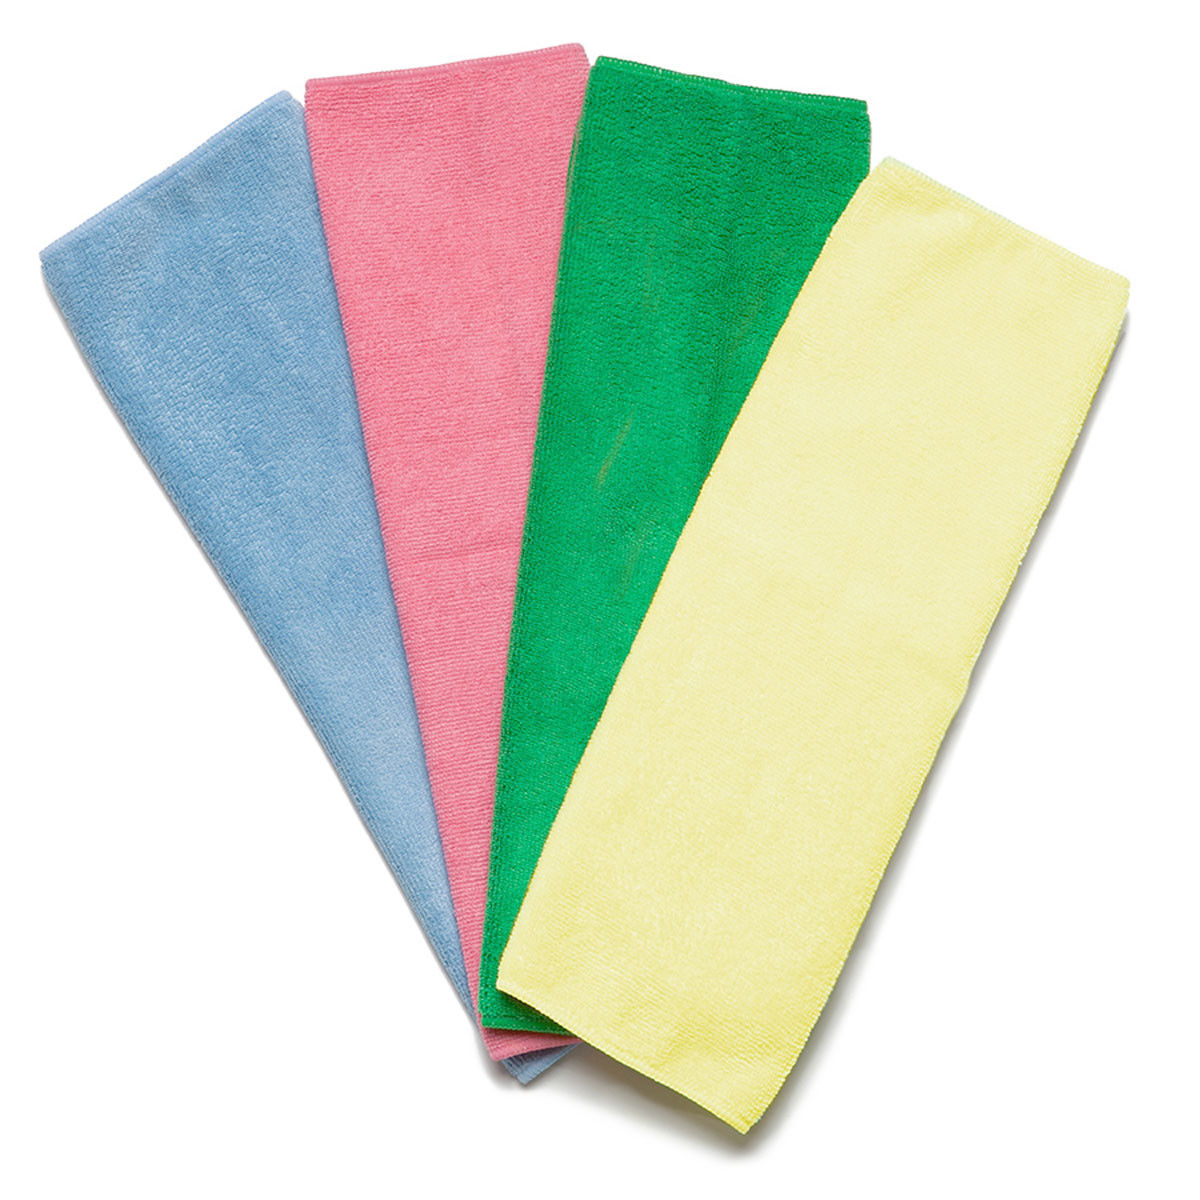 What surfaces are suitable for cleaning with these microfiber towels?